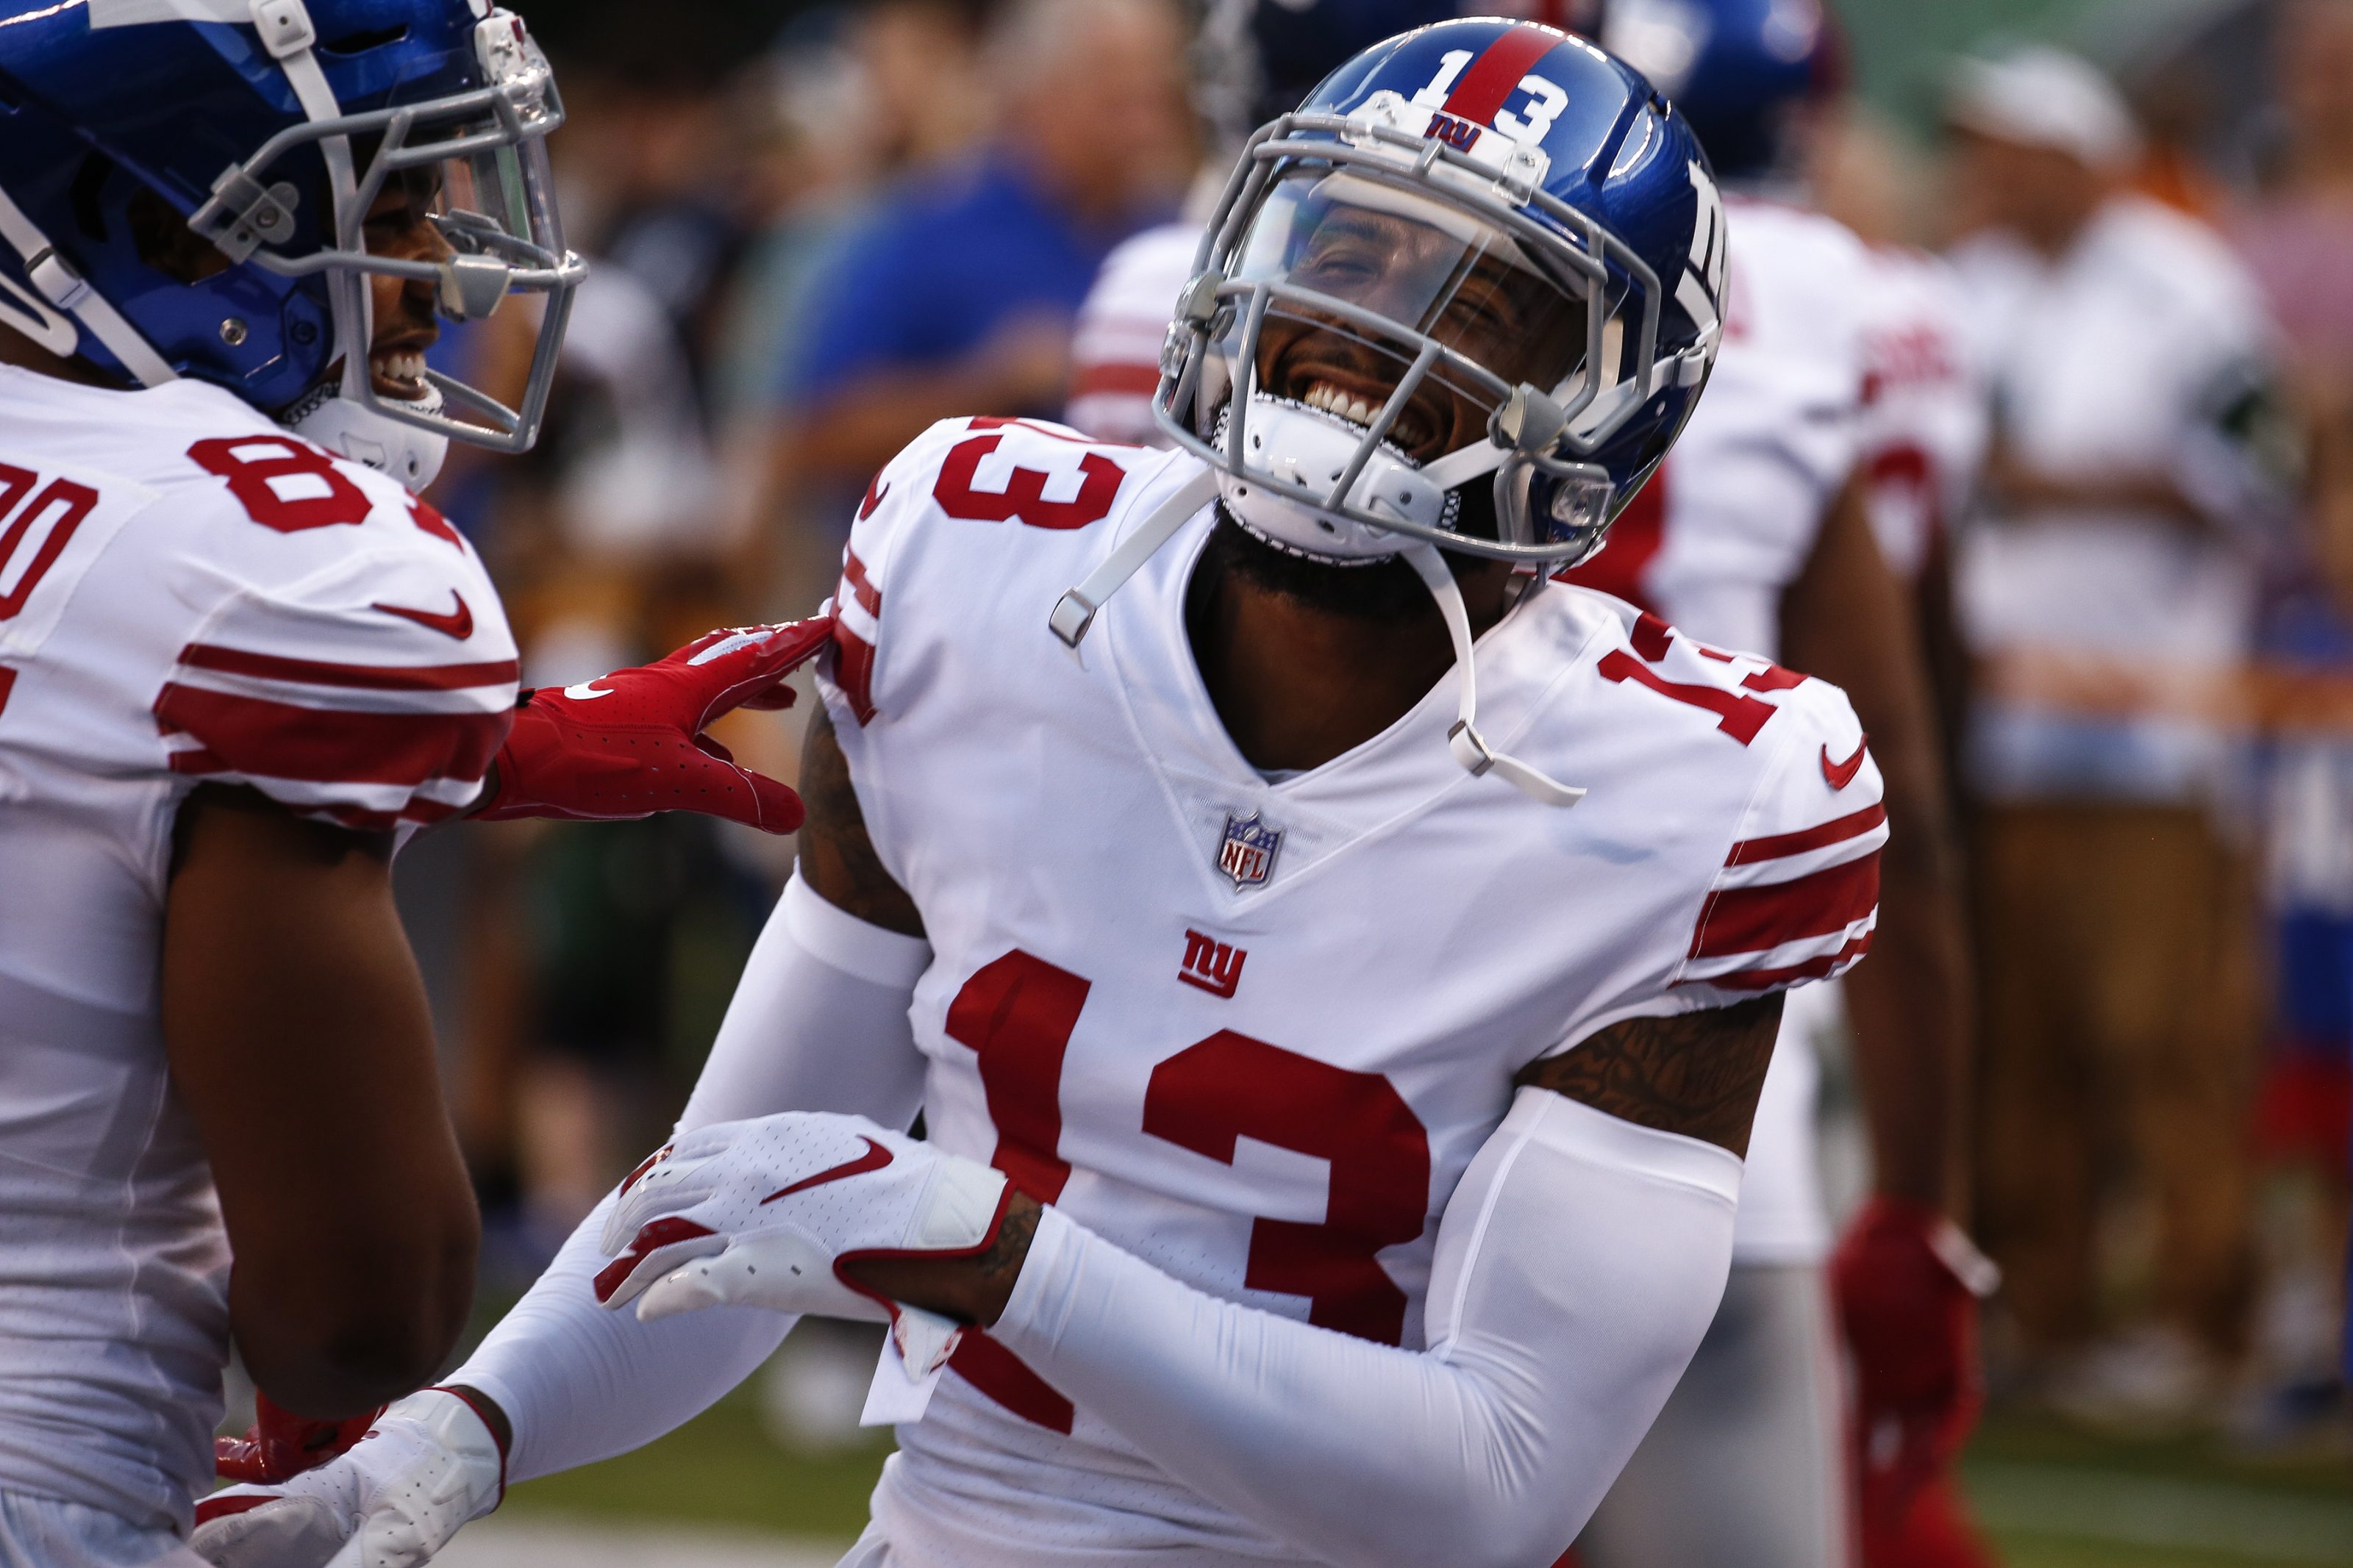 Giants' Odell Beckham: 'I've never been as ready as I am now